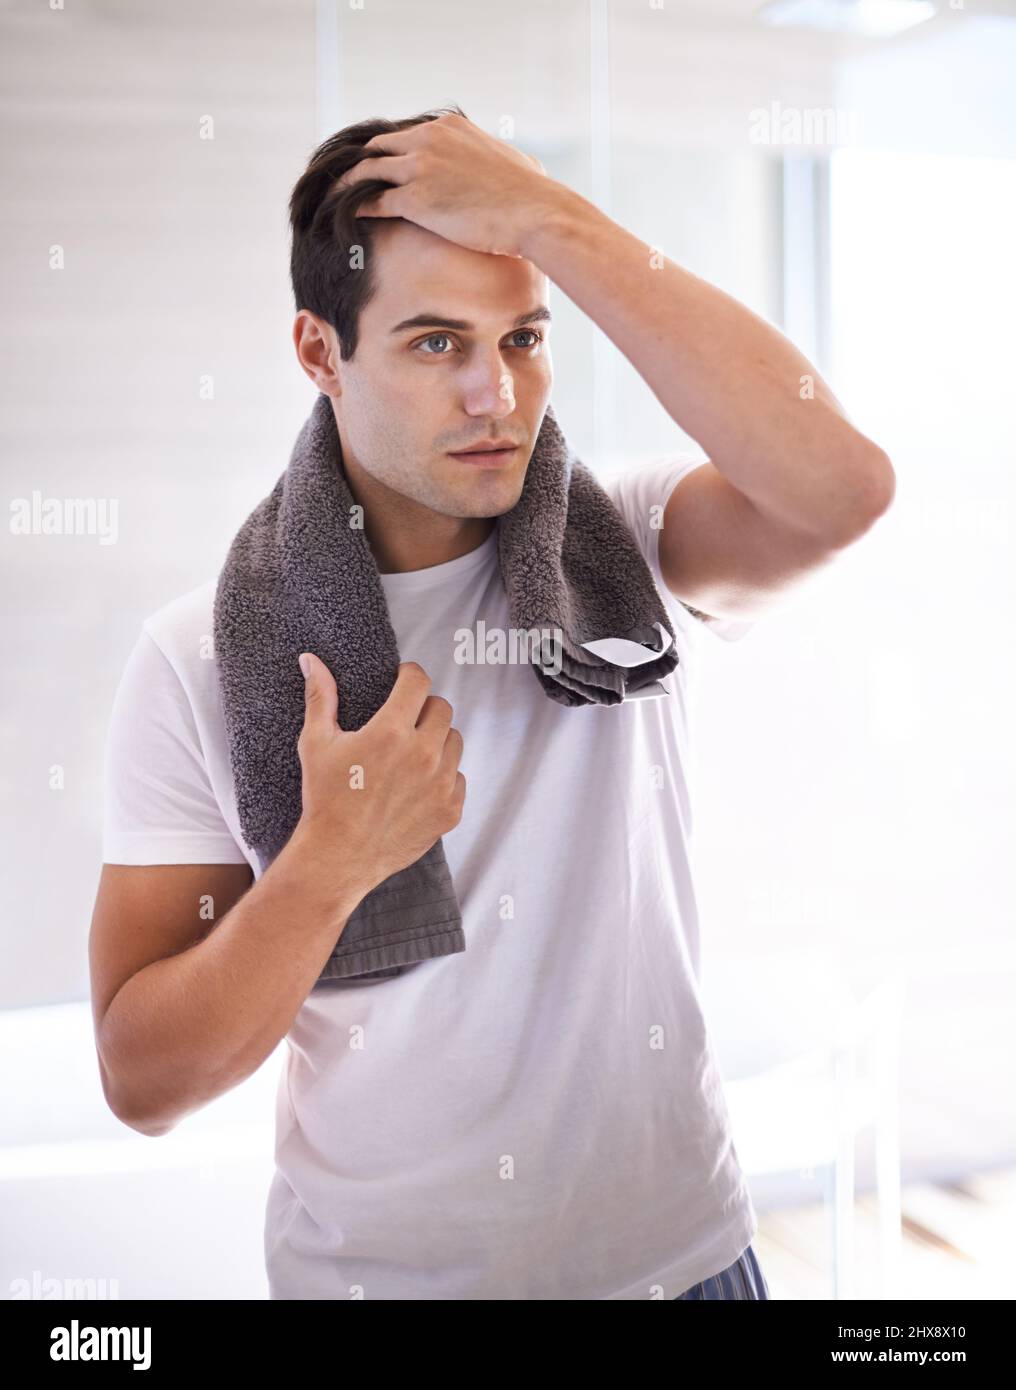 Time to shower and get shaved. Cropped shot of a young man in the bathroom with a towel around his neck. Stock Photo